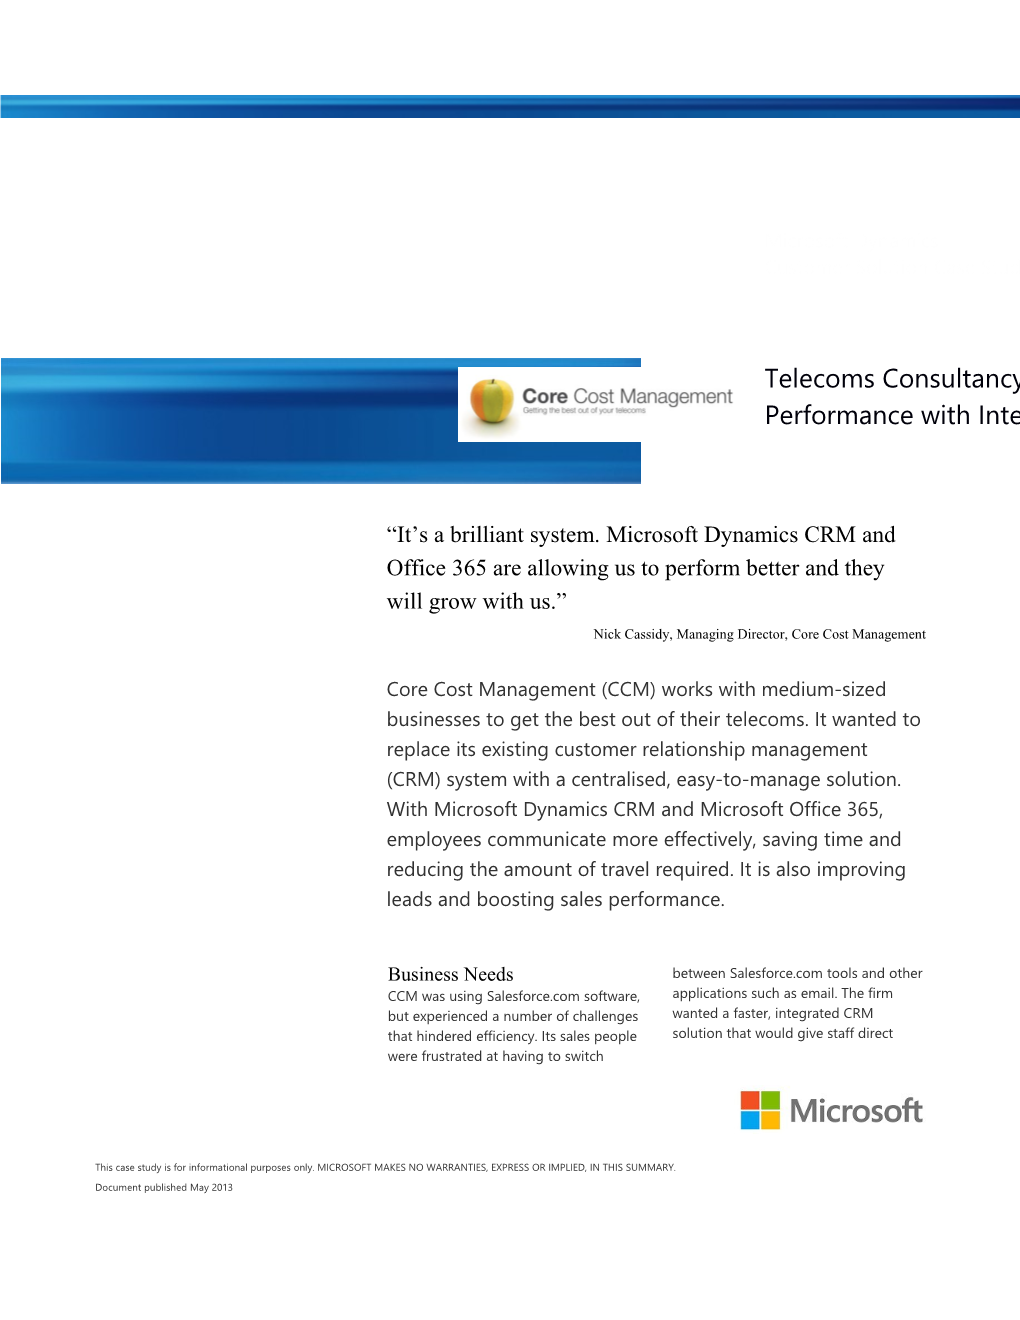 Writeimage CSB Telecoms Consultancy Improves Sales Performance with Integrated Microsoft